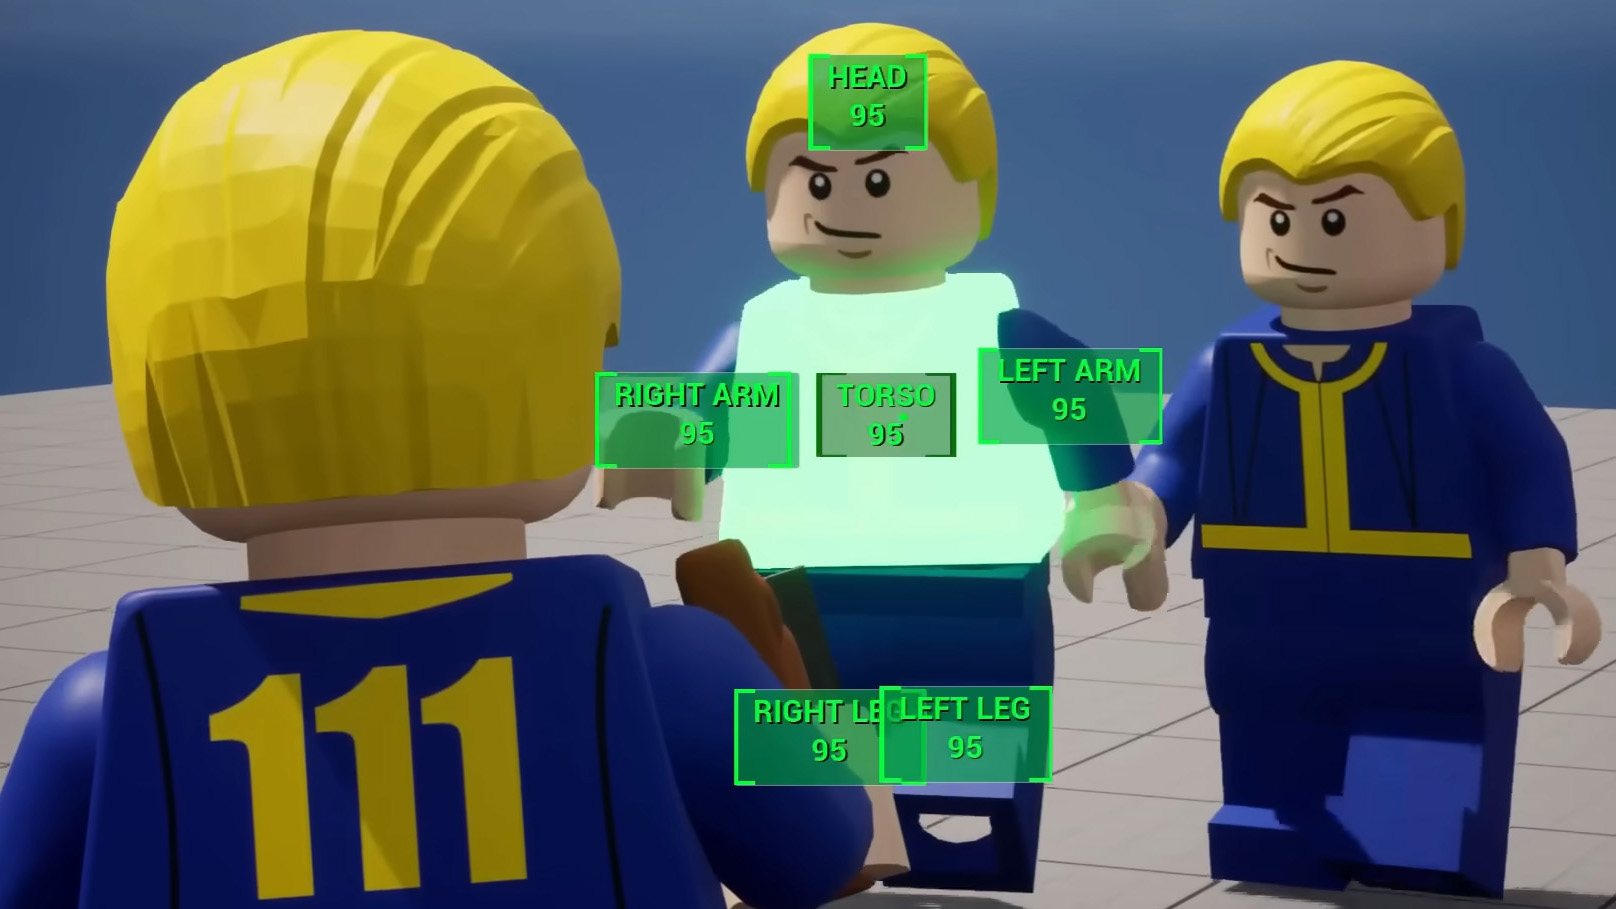  War sometimes changes: Here's a free Lego Fallout game 